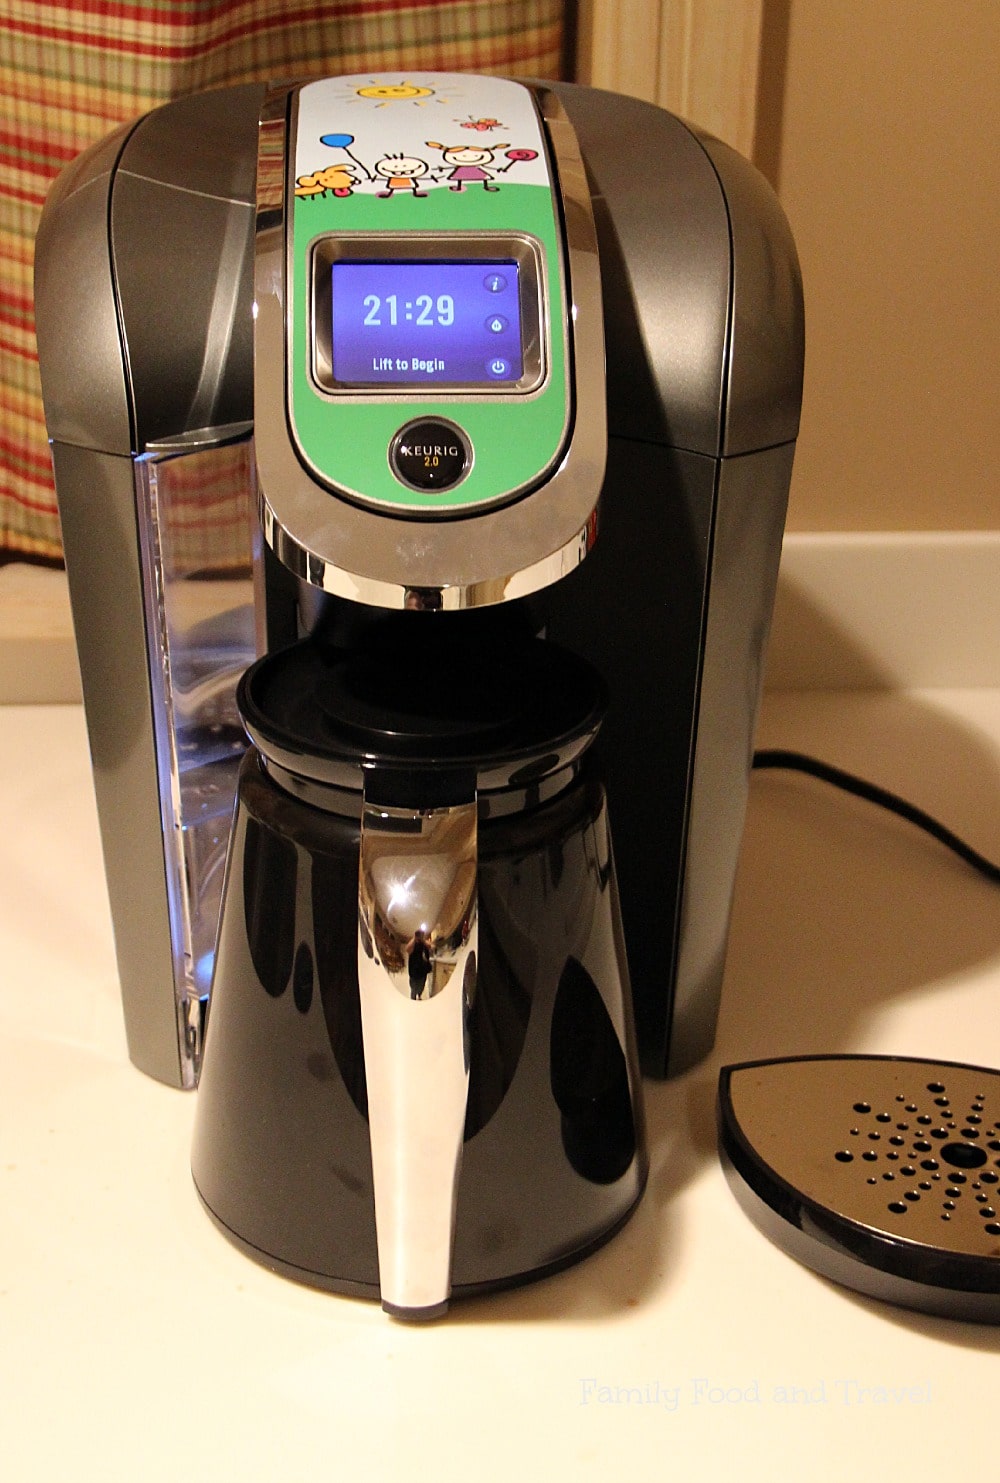 Brew a carafe with Keurig 2.0